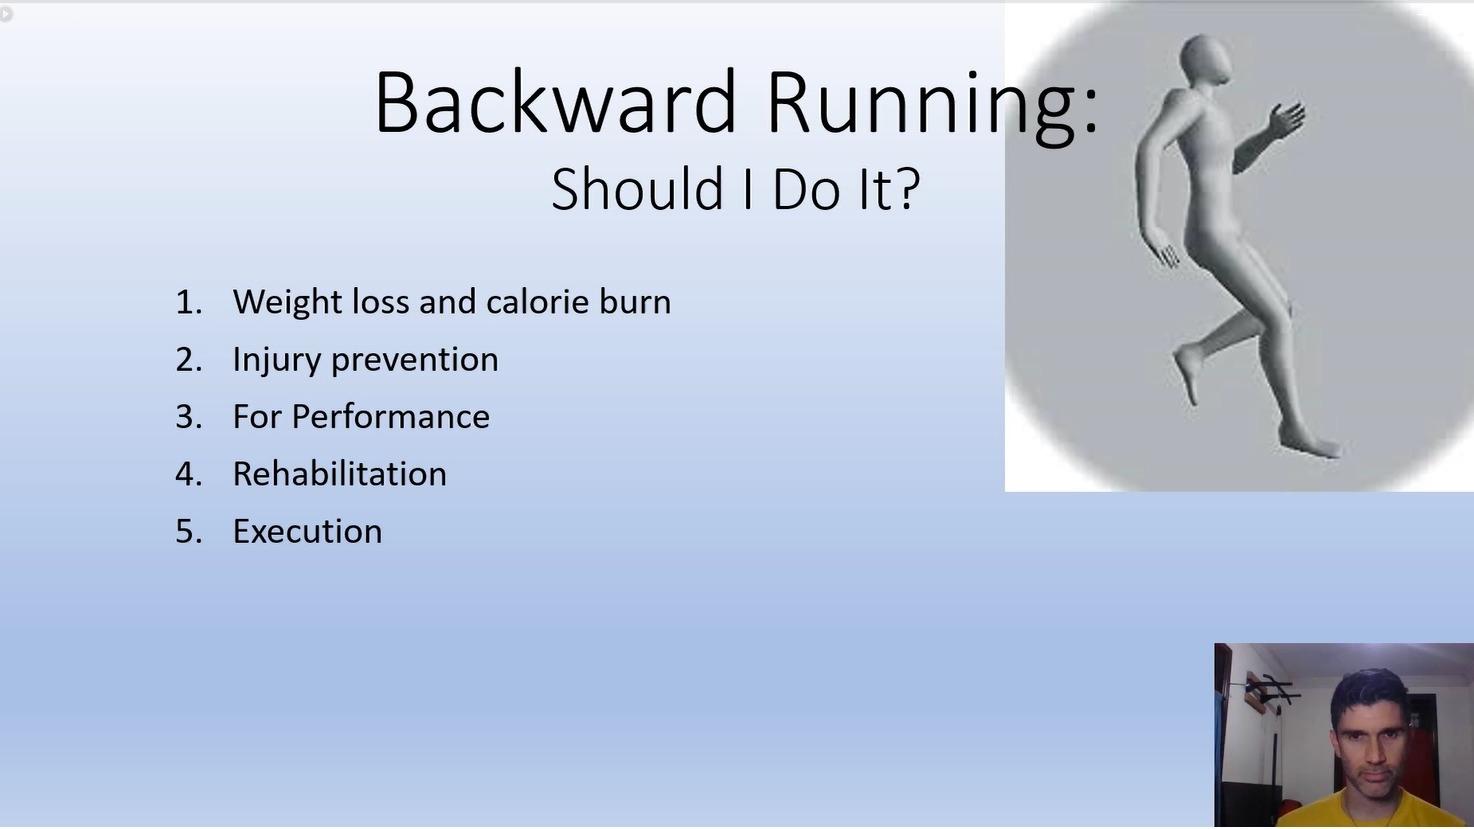 Backward Running For Weight Loss, Performance, Injury Prevention